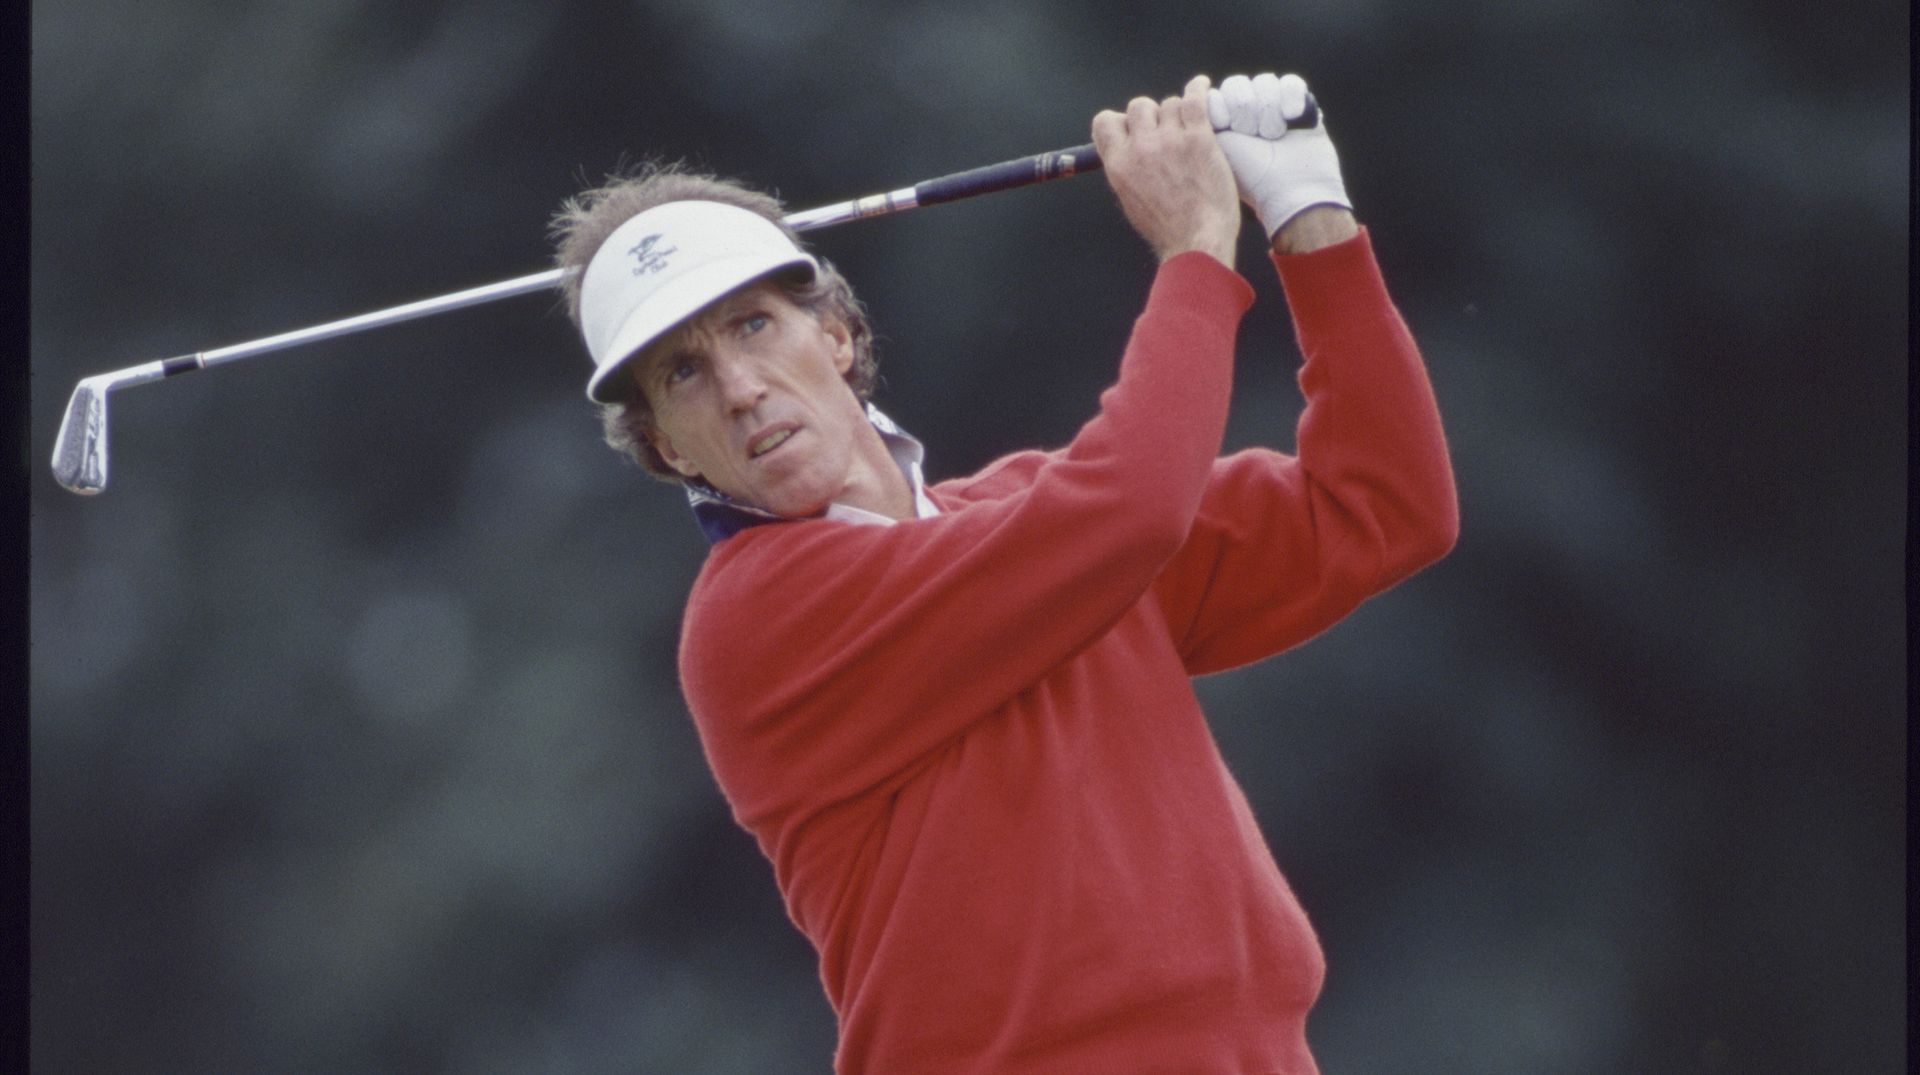 <p>                     O’Grady played the PGA Tour in the 1970s and 1980s after a record number of attempts at qualifying school. Many regarded the American as one of the purest ball-strikers of his time. Despite finding victories hard to come by (he did win twice on the PGA Tour), his swing was often labelled as perfect. He once spent more than $150,000 of his money on a computerized attempt to devise an ideal swing.                   </p>